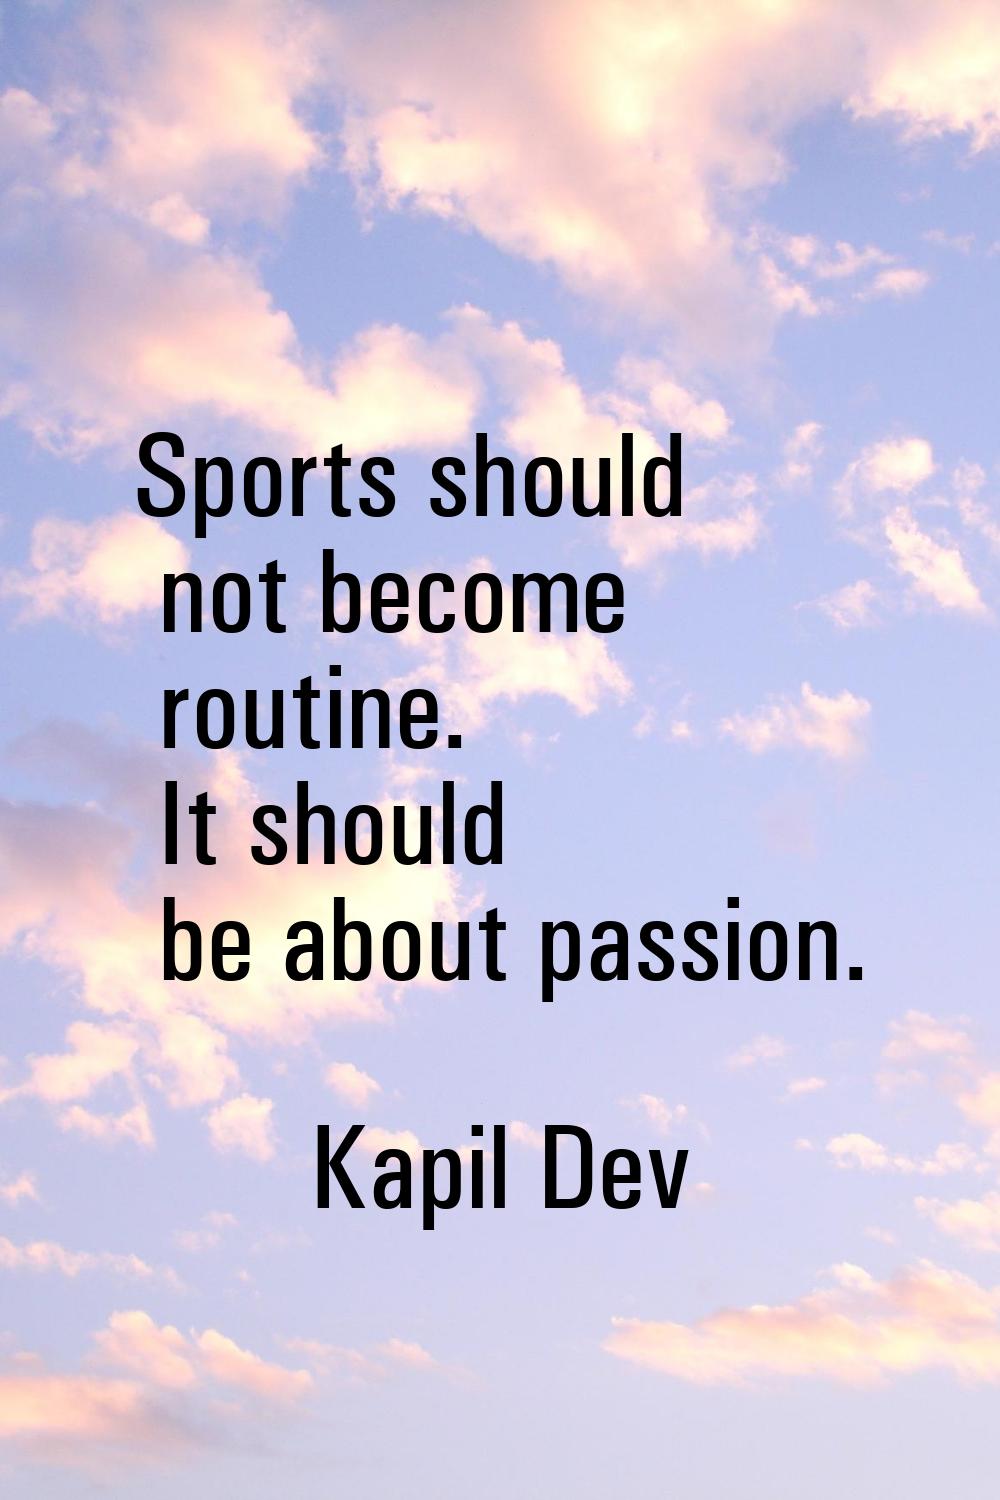 Sports should not become routine. It should be about passion.